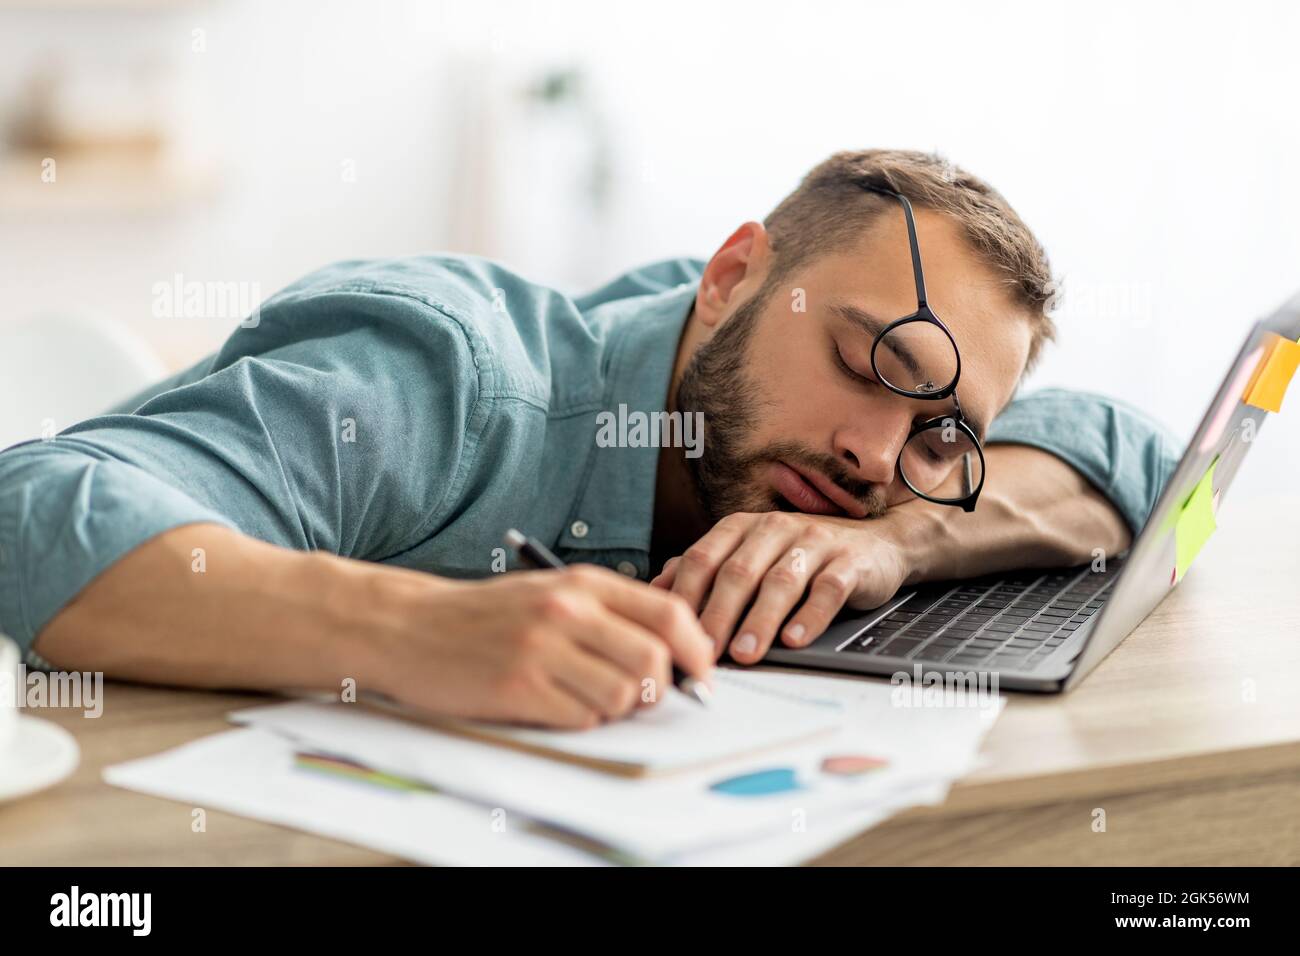 Exhausted millennial man sleeping on his office desk, next to laptop and documents, tired of overworking Stock Photo